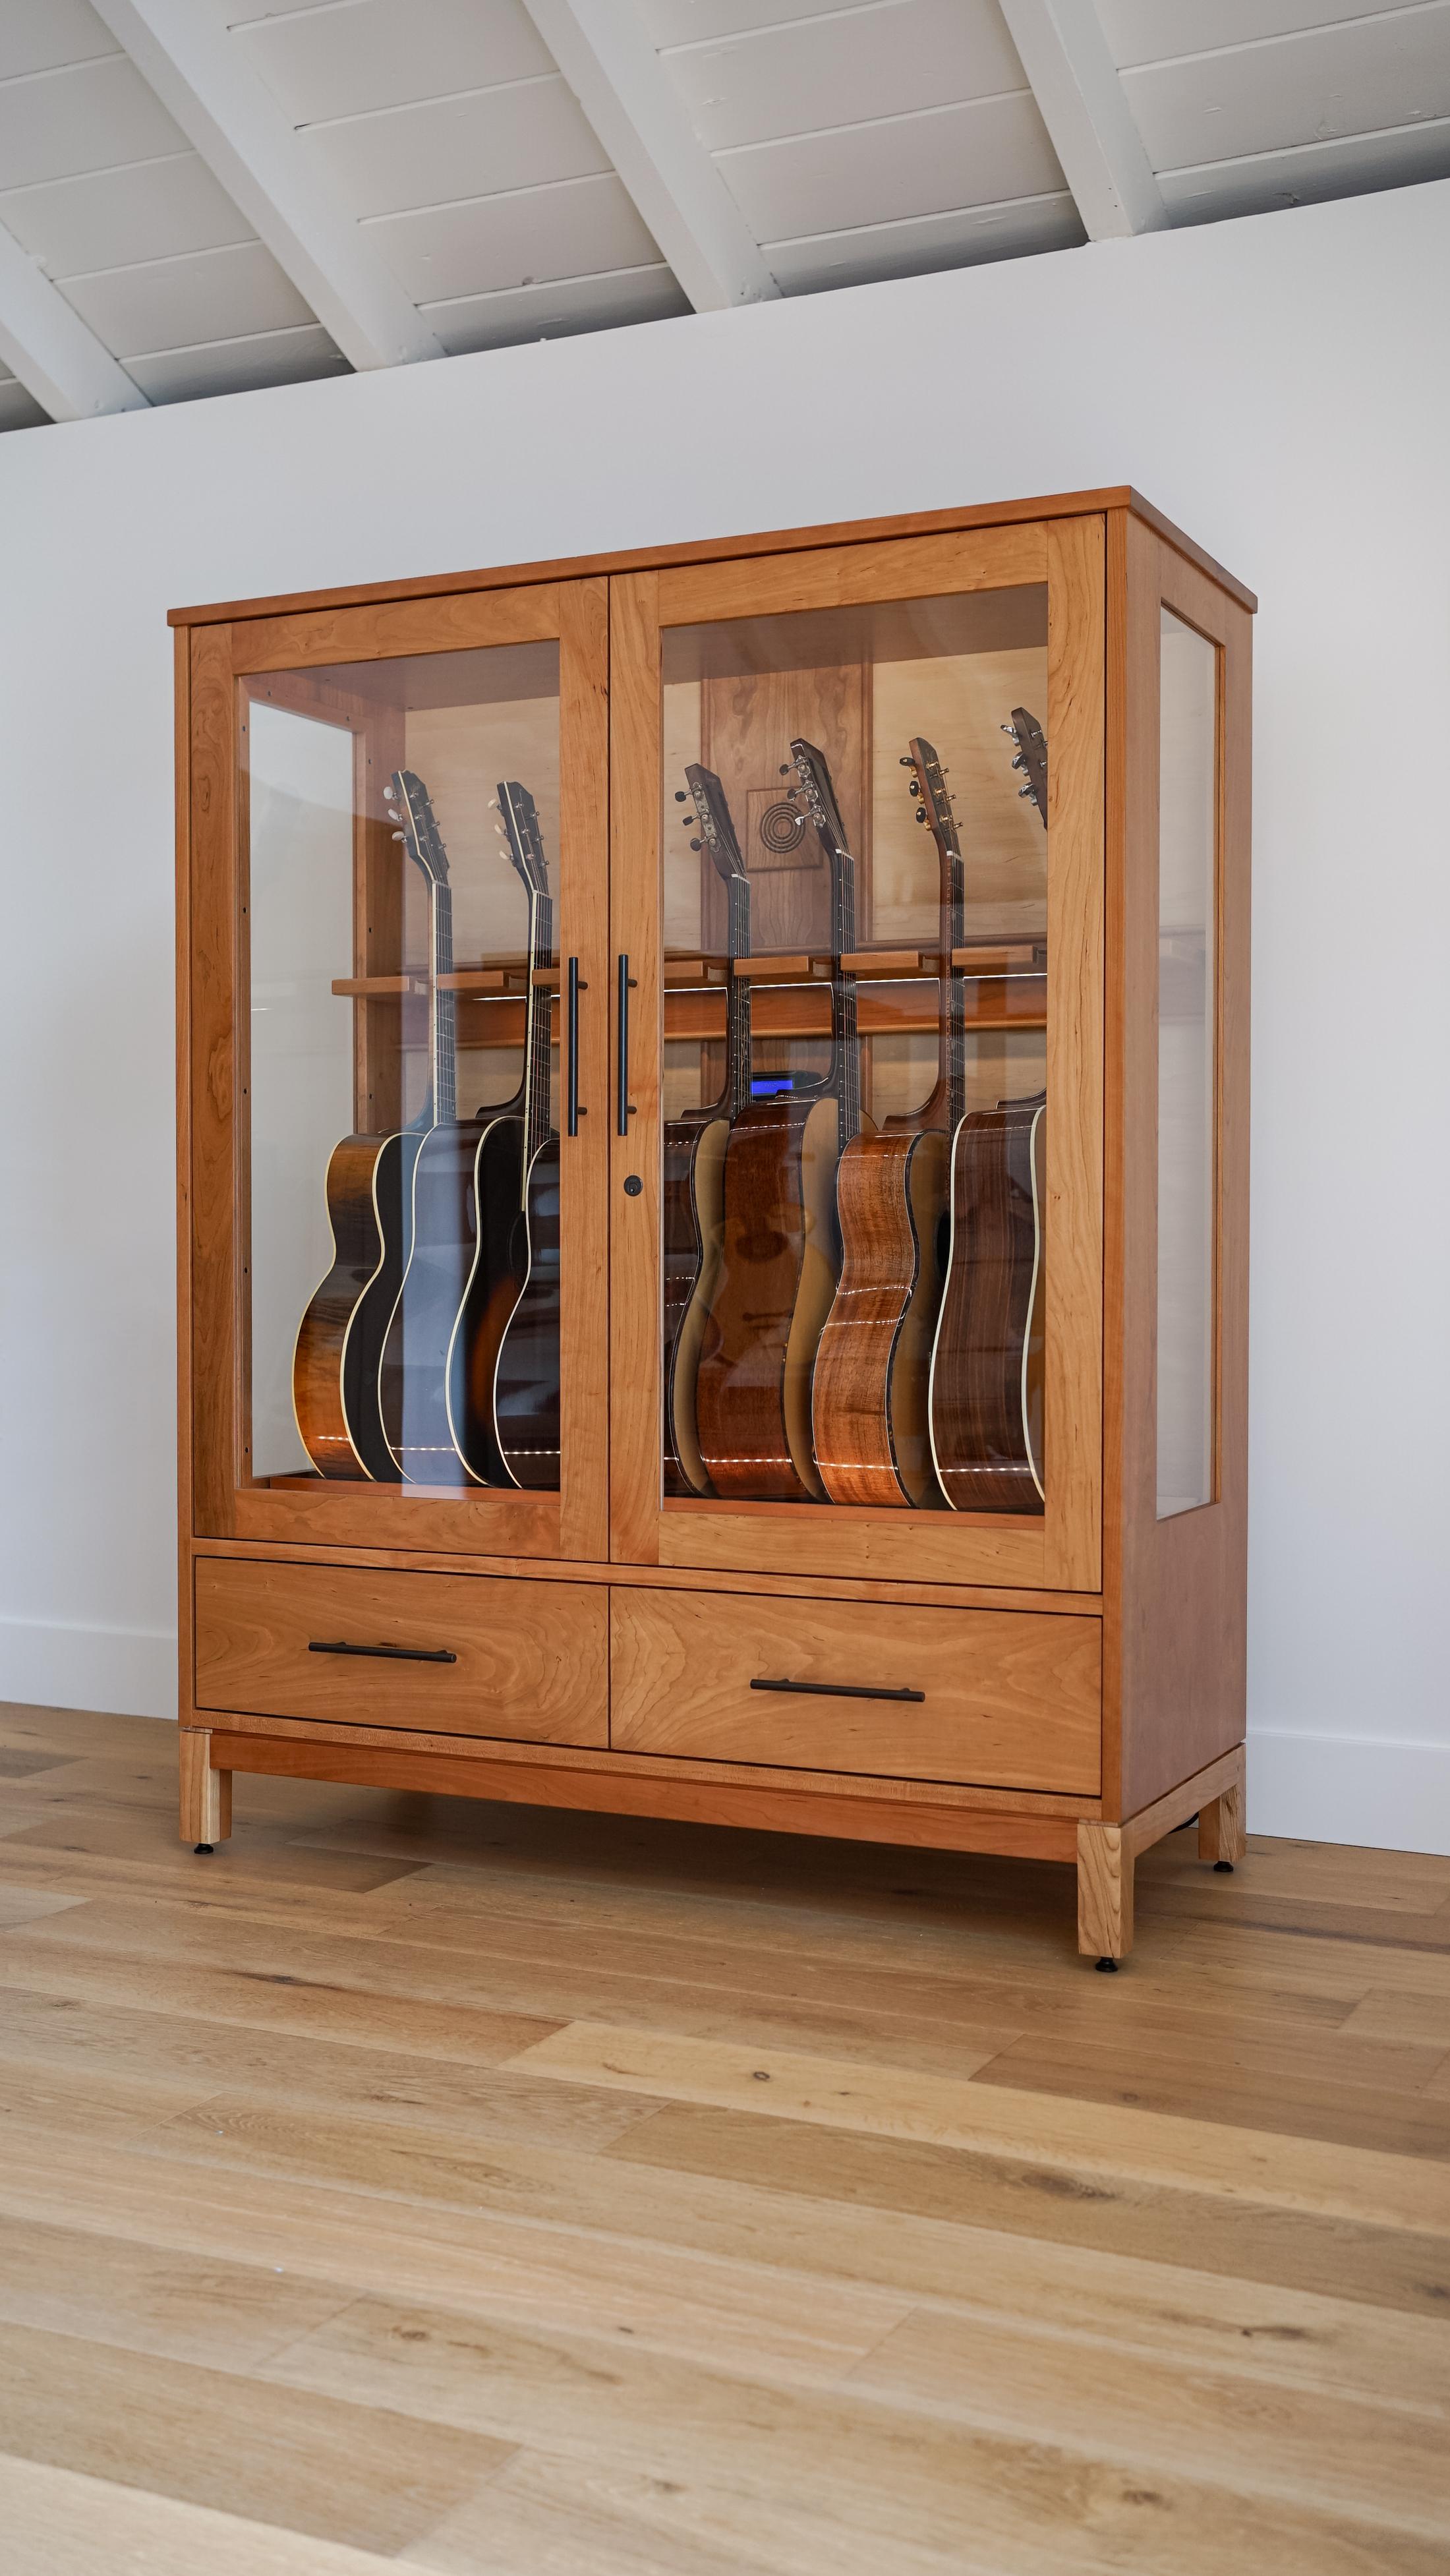 American Humidified Guitar Display Case - Medium Habitat Humidified Cabinet For Sale